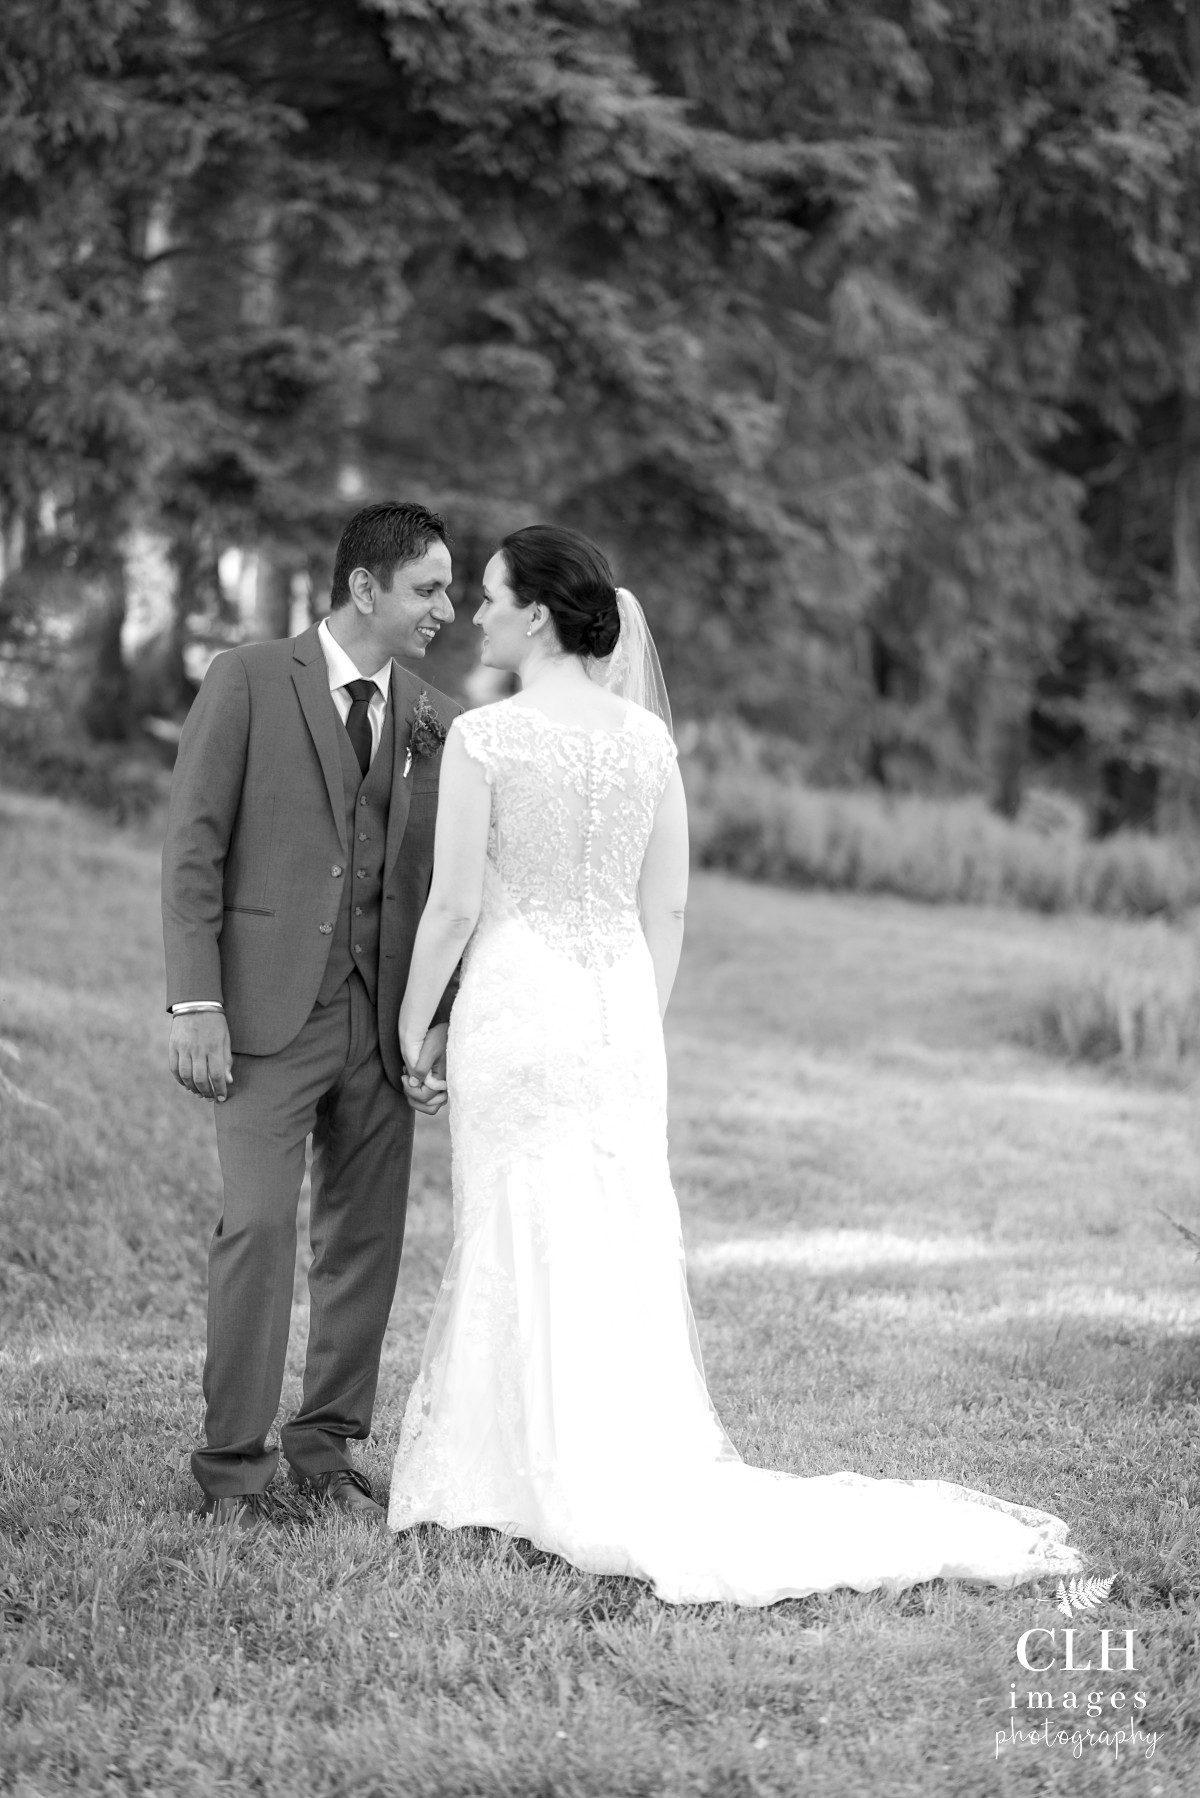 CLH images Photography Catskill New York Weddings Barn Weddings Rustic Weddings New York Wedding Photographer Becky and Harinder (66)